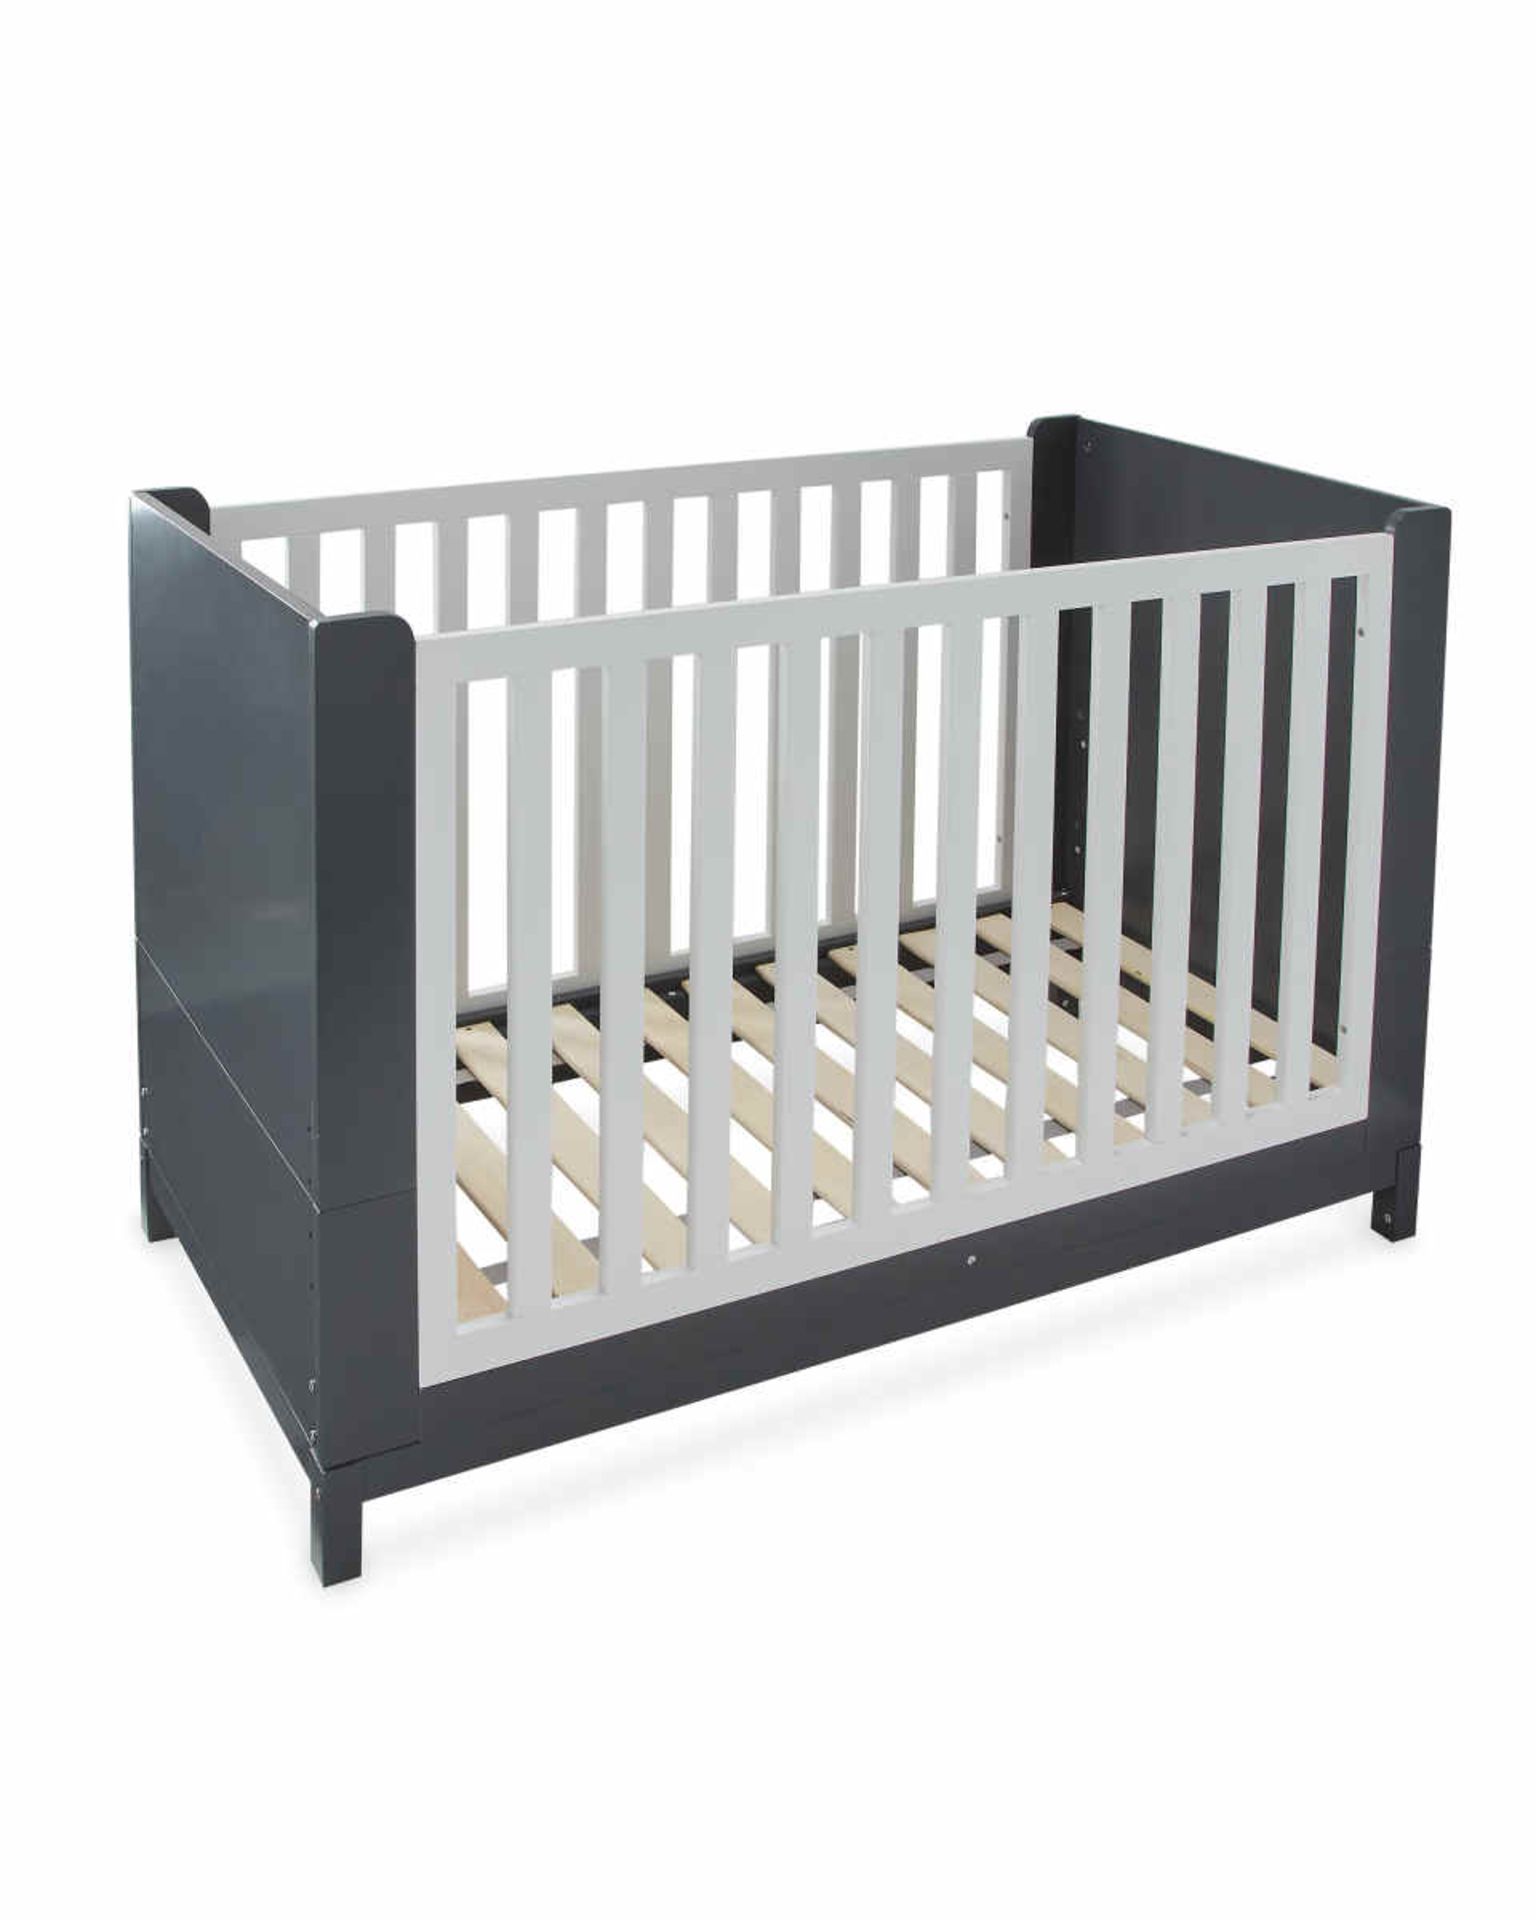 Mamia Grey And White Cot Bed. Make sure your nursery furniture is in place with this Mamia Grey